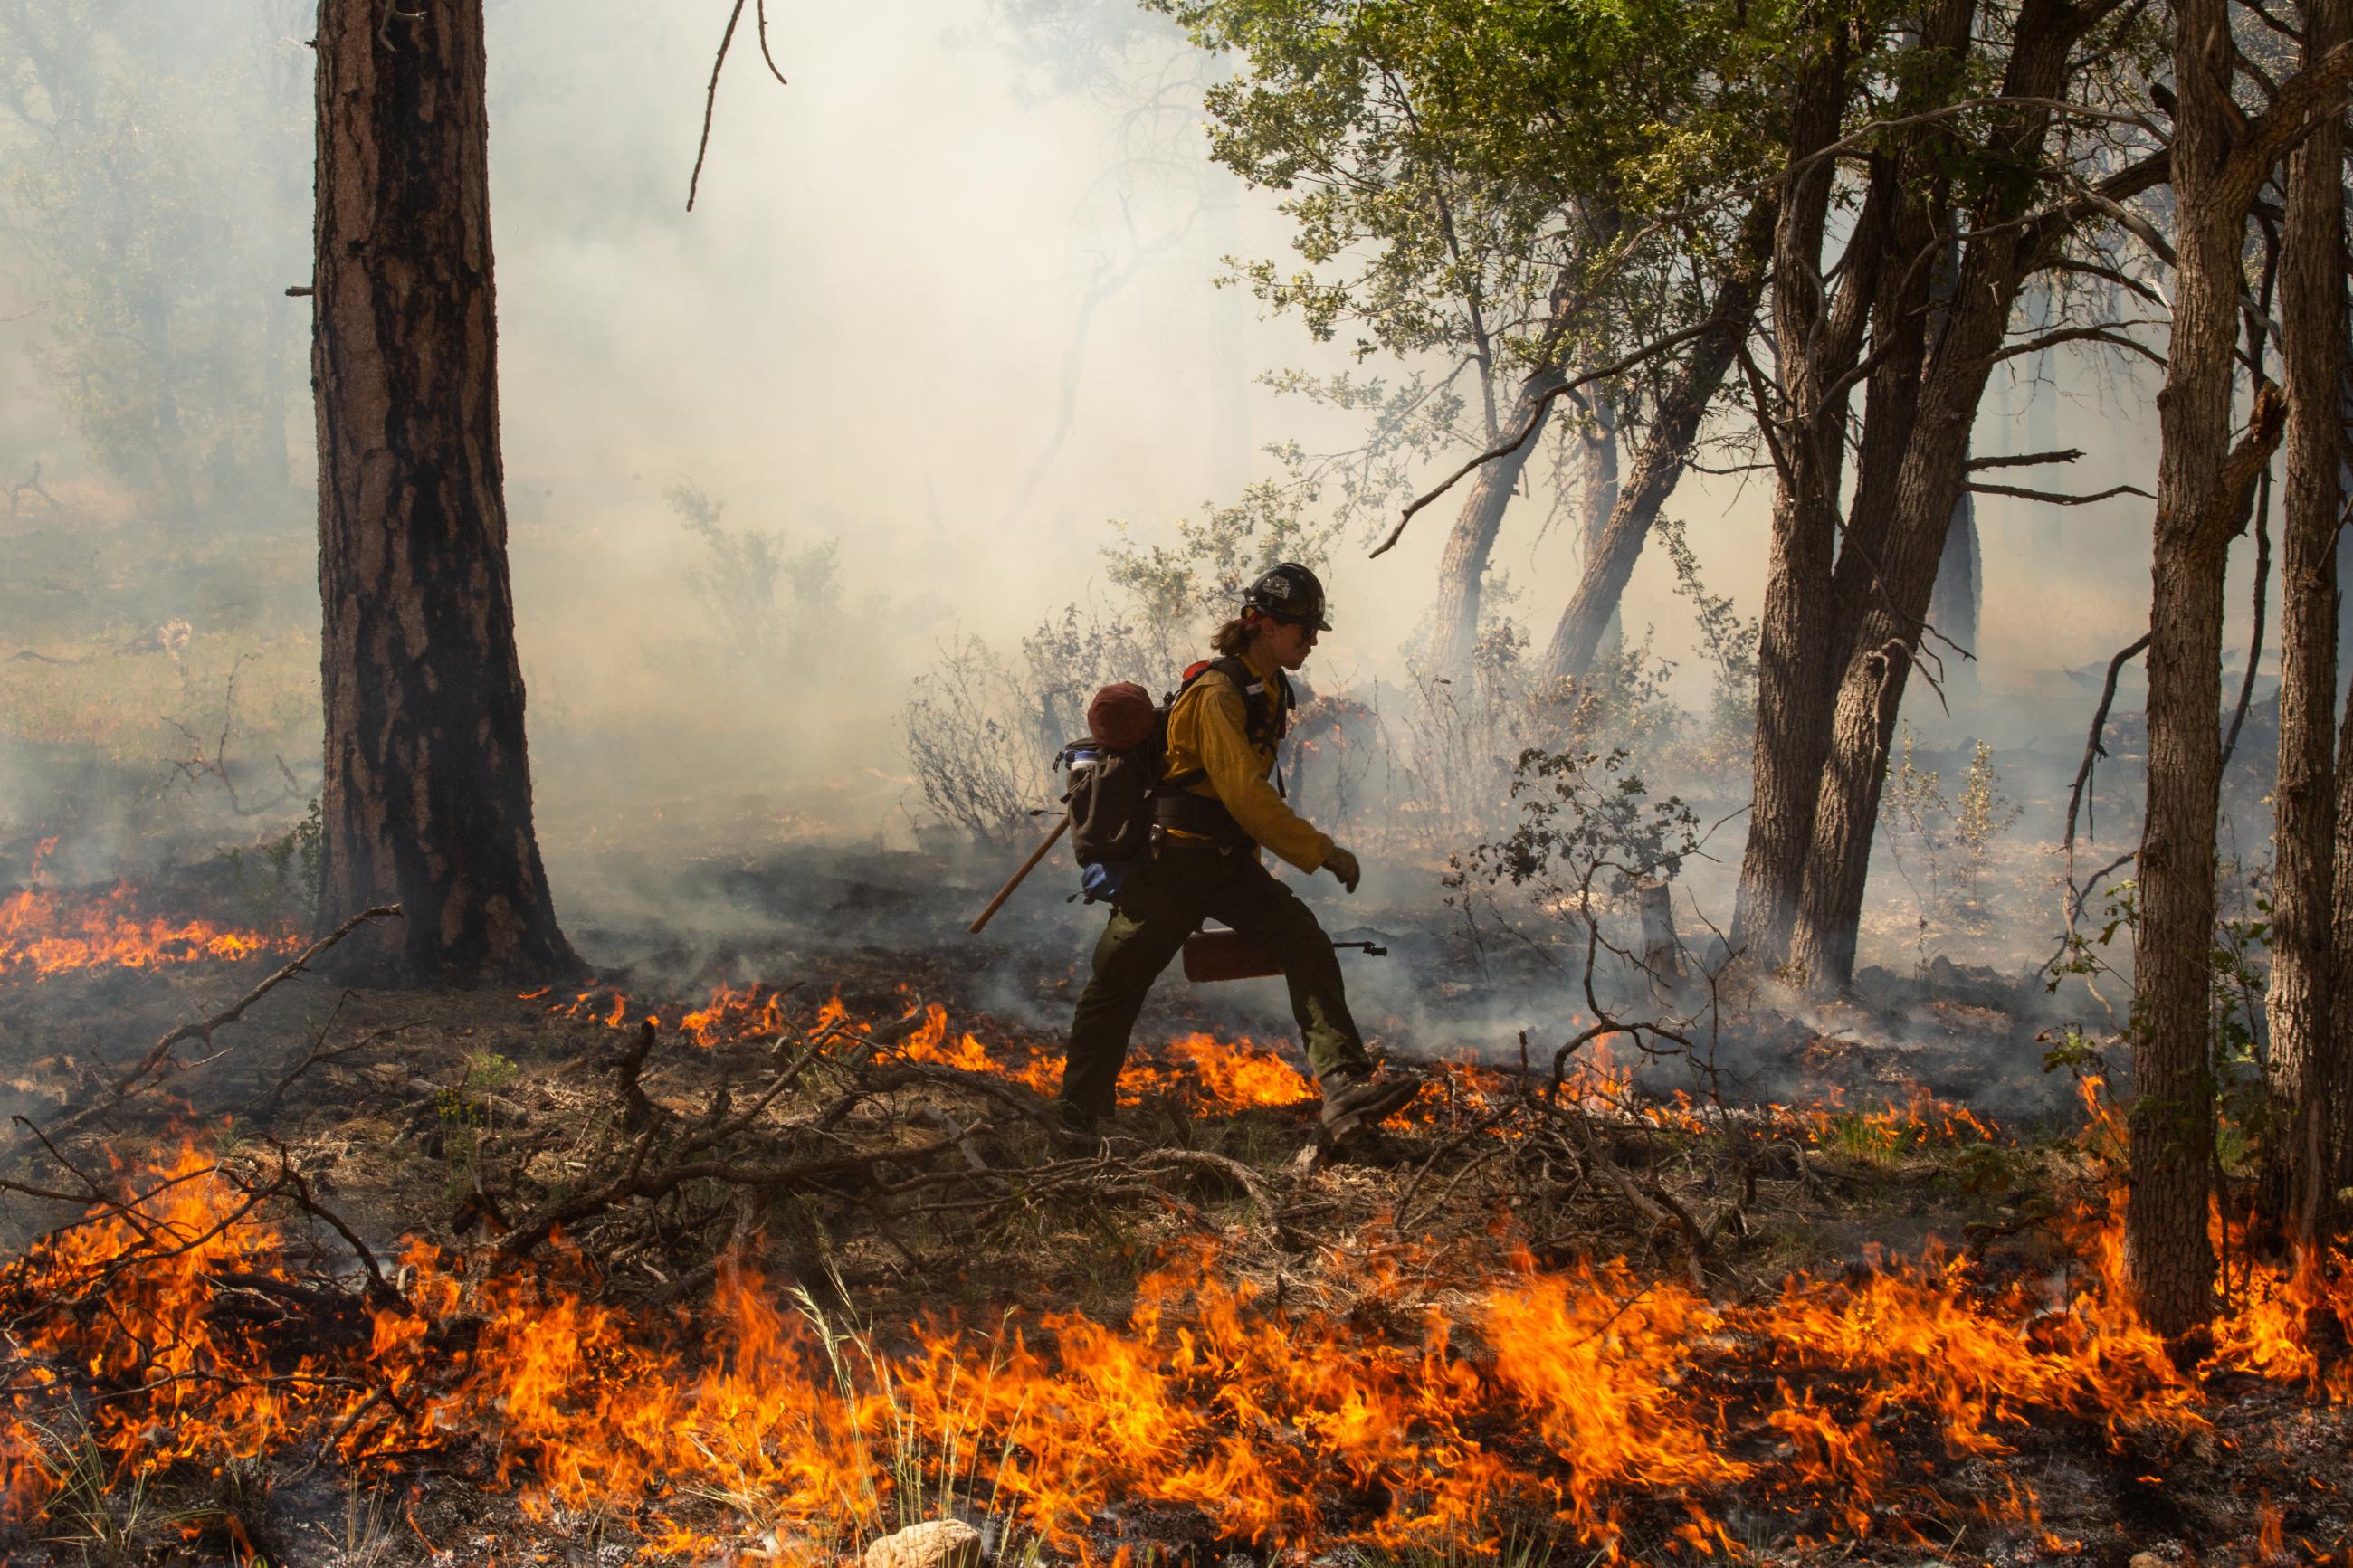 A firefighter carries a drip torch across the forest floor while flames consume the foreground of the photo